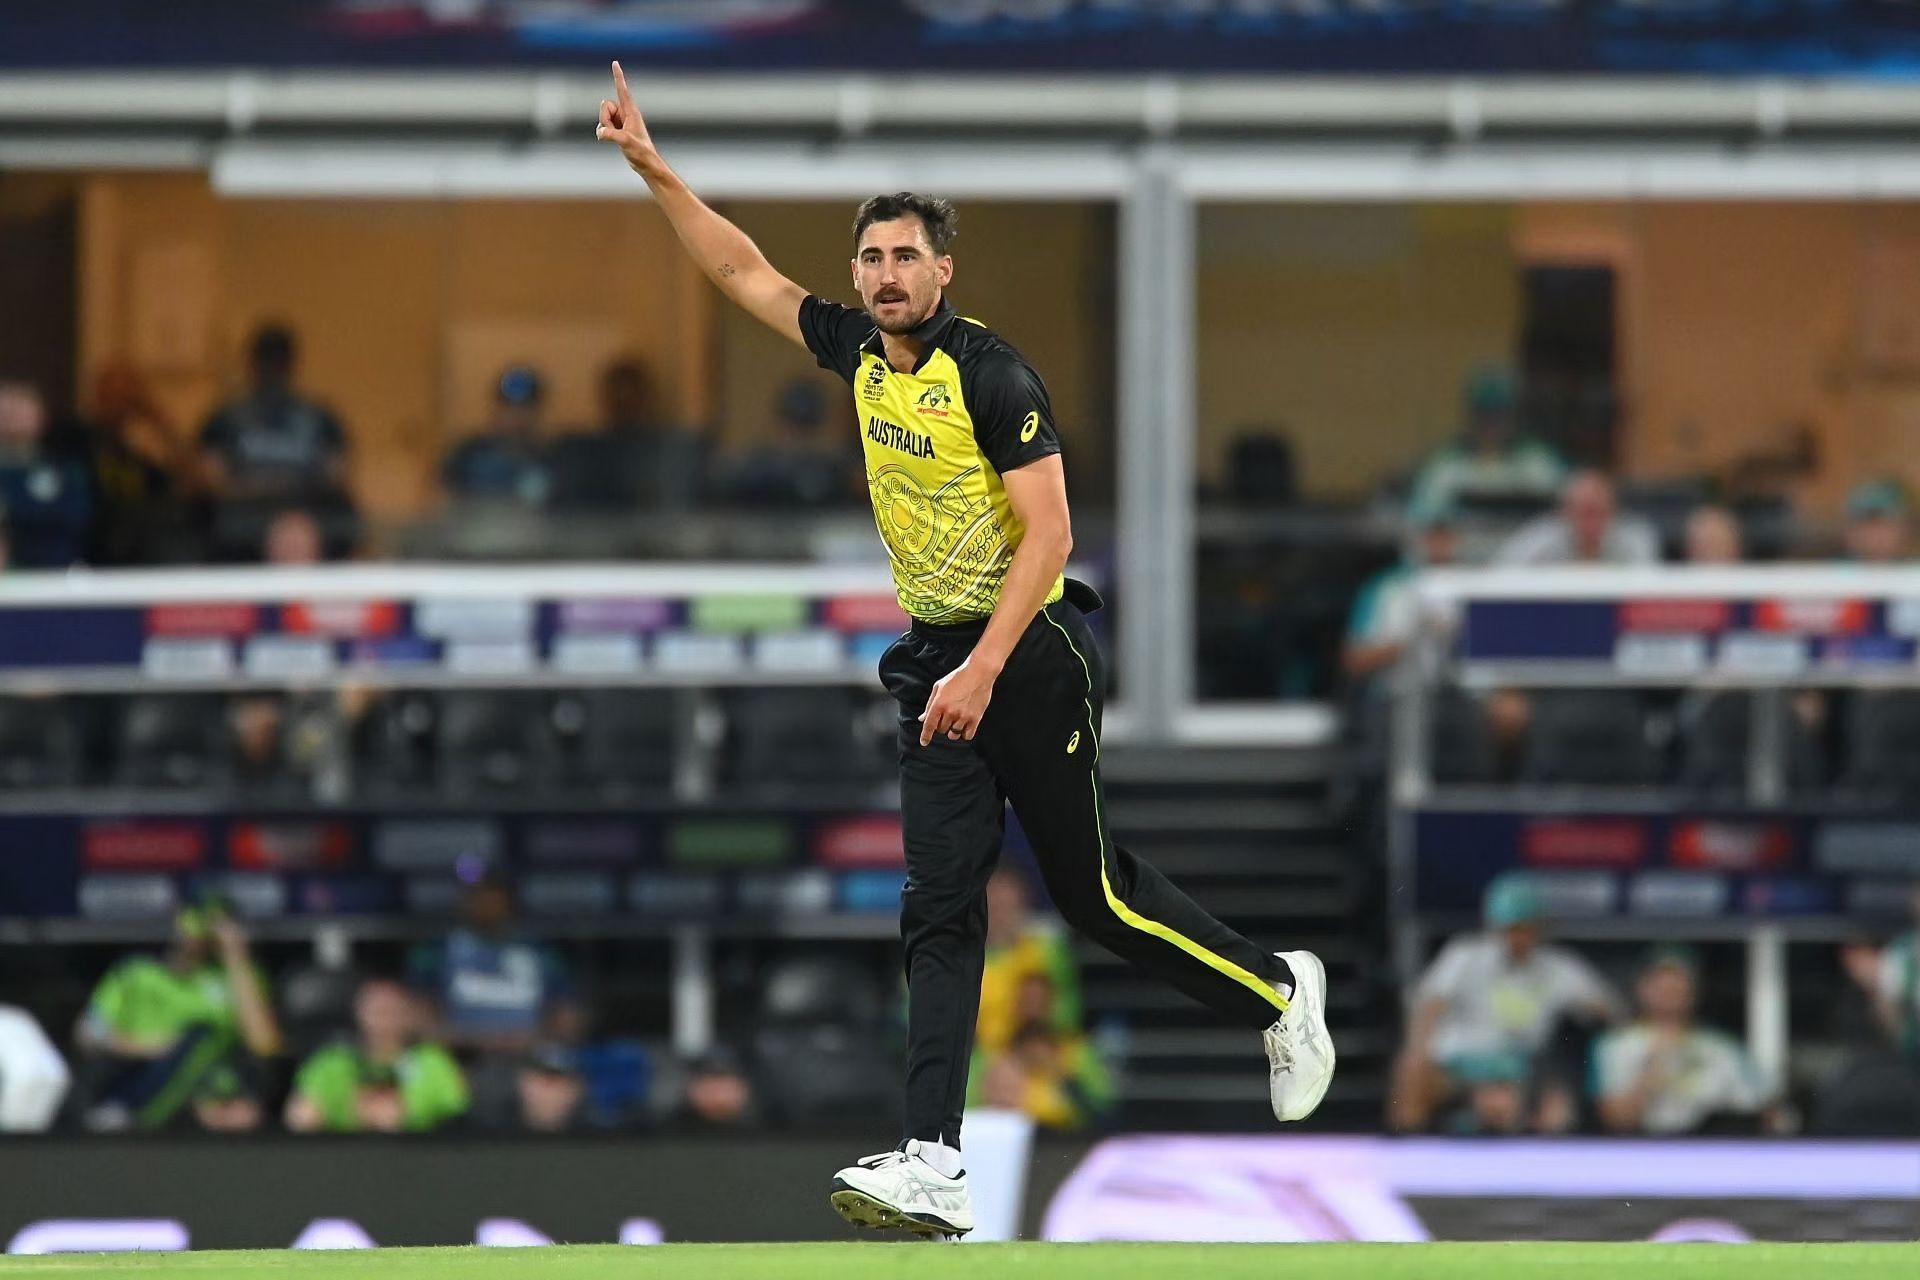 Mitchell Starc is one of the most lethal bowlers with the white ball. [P/C: Getty]